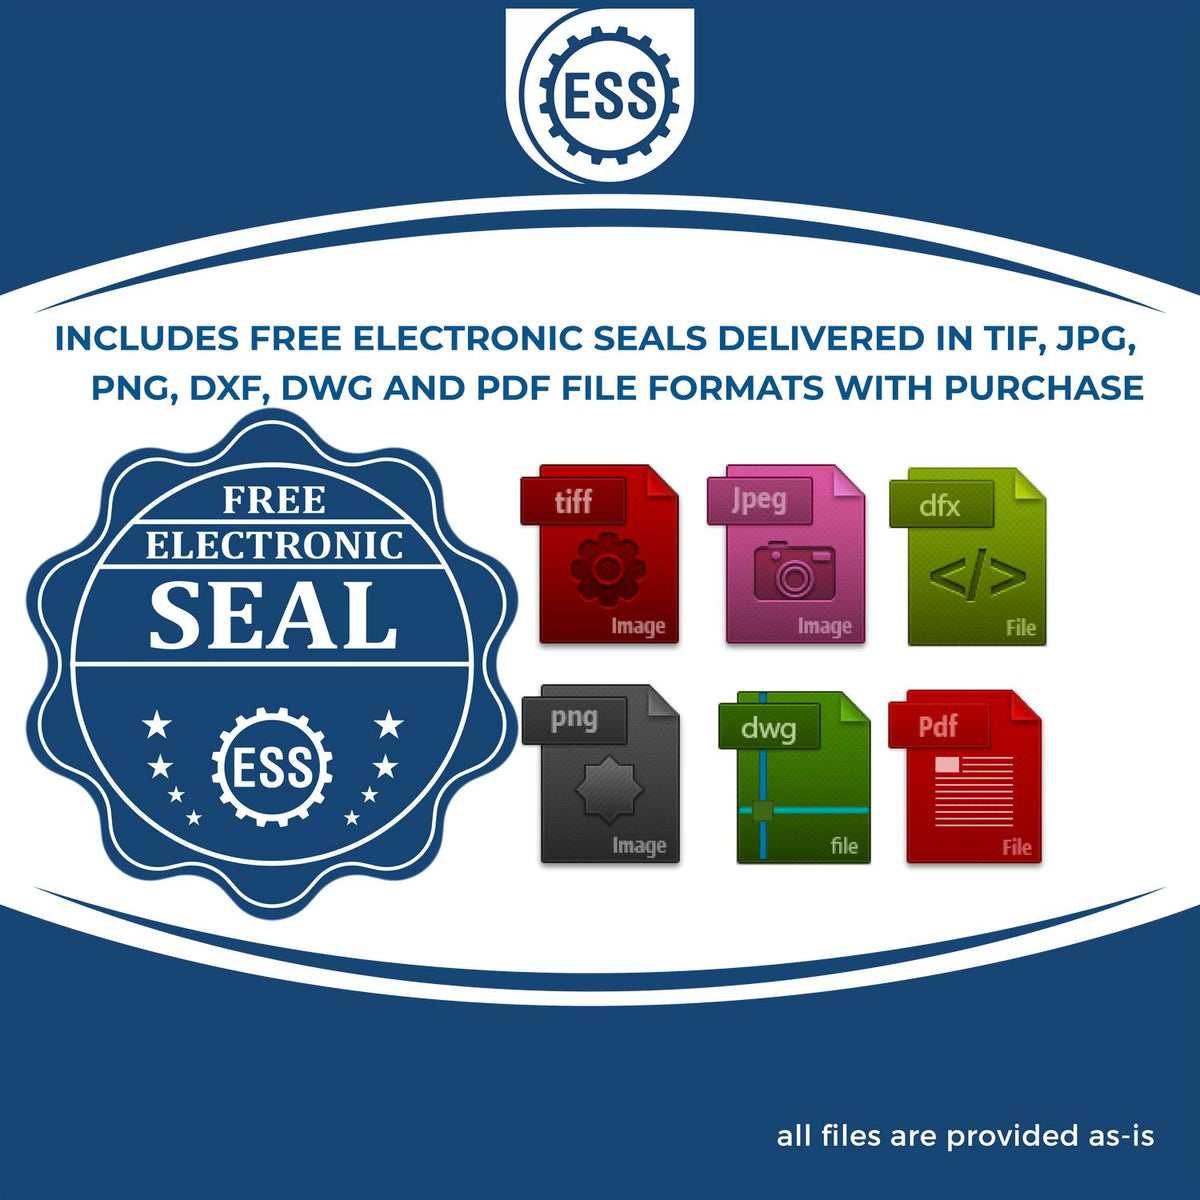 An infographic for the free electronic seal for the Soft Hawaii Professional Geologist Seal illustrating the different file type icons such as DXF, DWG, TIF, JPG and PNG.